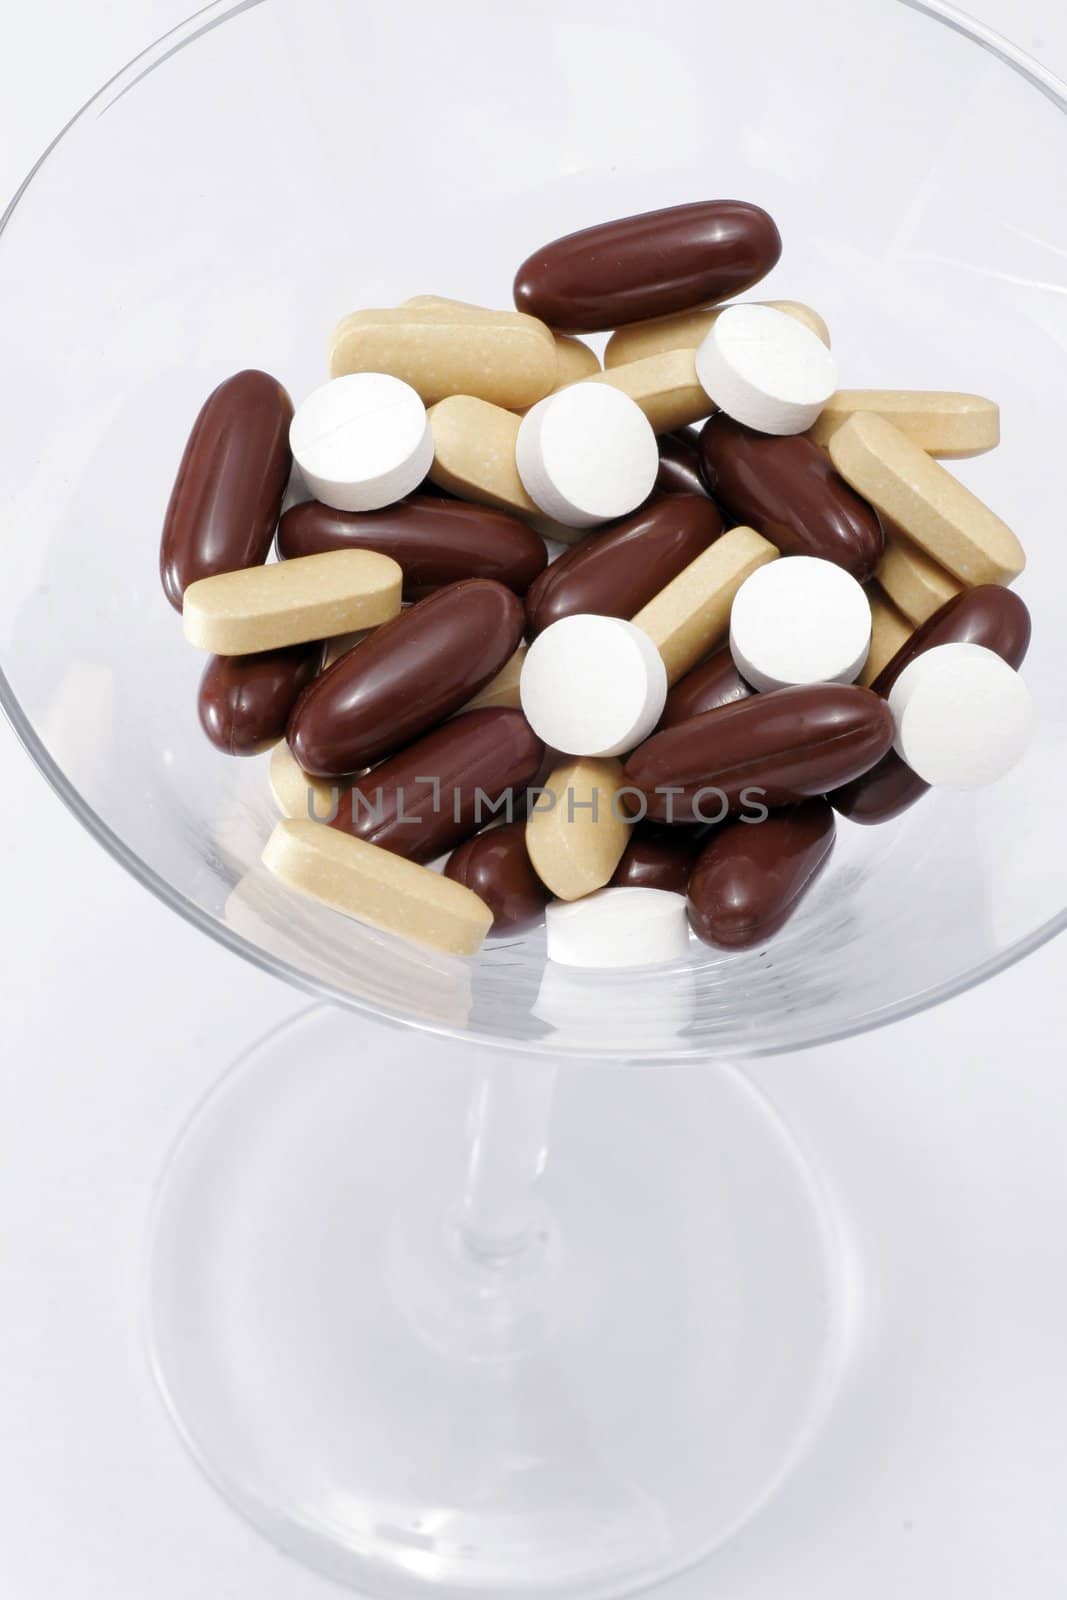 Deadly Cocktail - A Martini Glass Filled With A Mixture Of Pills- White Background